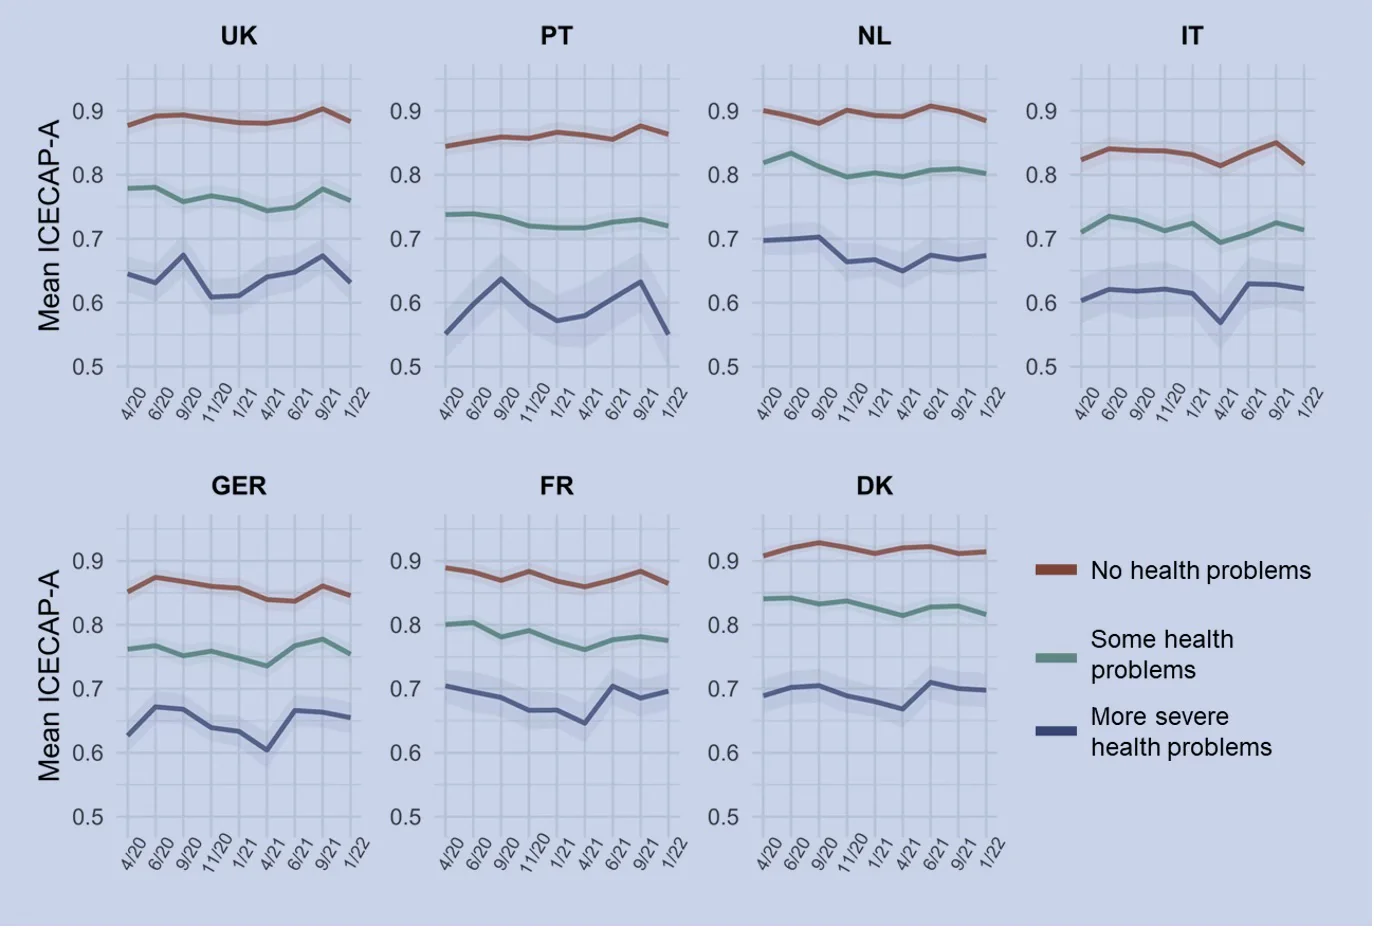 Well-being (measured by Mean ICECAP-A utility score) in different countries over time, by health status.